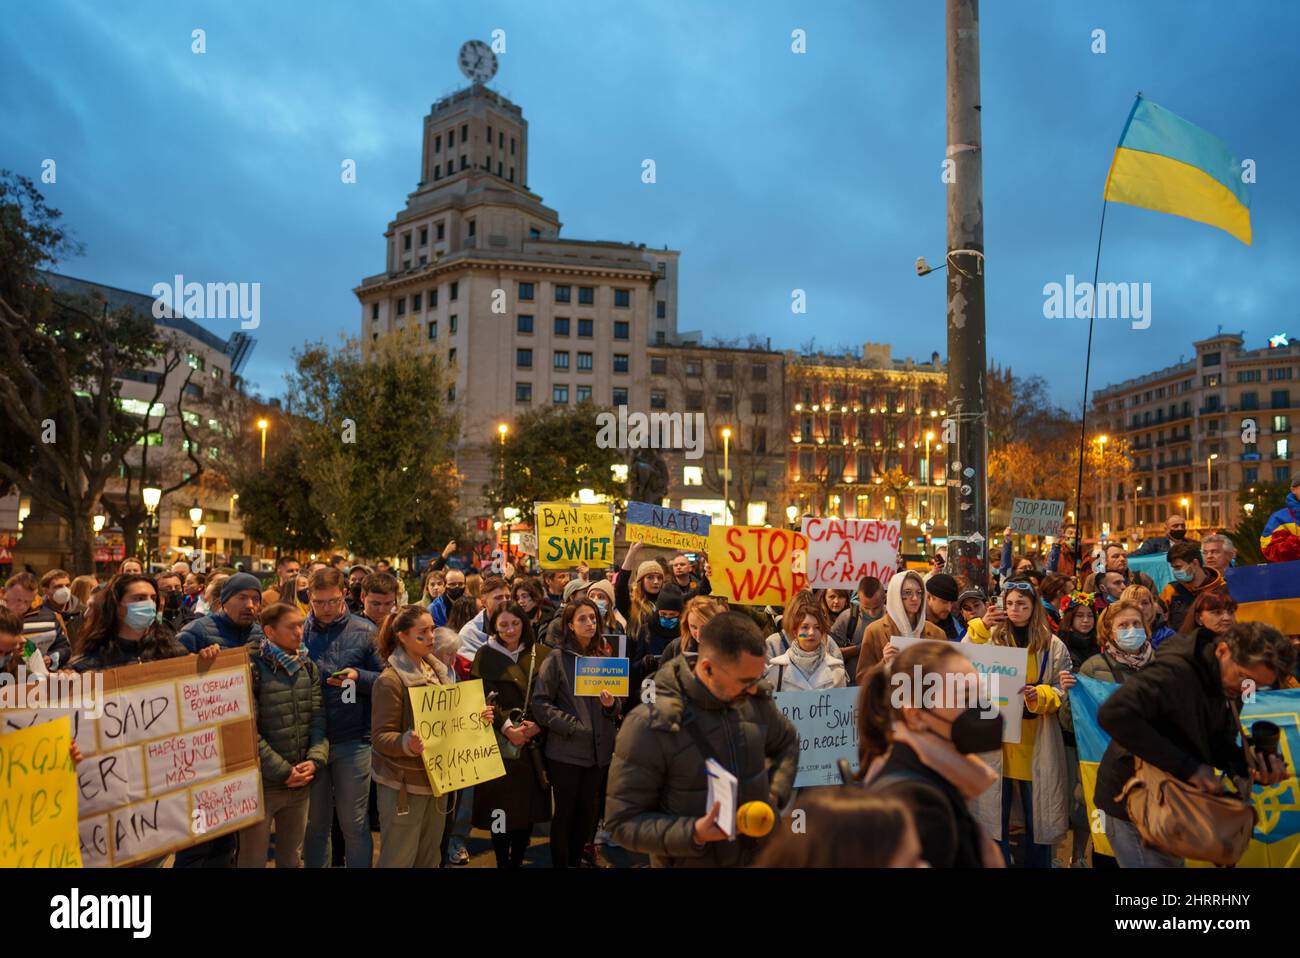 Barcelona, Spain - February 25, 2022: Protest against the war and russian aggressive Vladimir Putin politic. Ukrainians in Spain in defense of Ukraine on plaza Catalunya place. Global military conflict, invasion. Reportage editorial photo from Catalunya Stock Photo